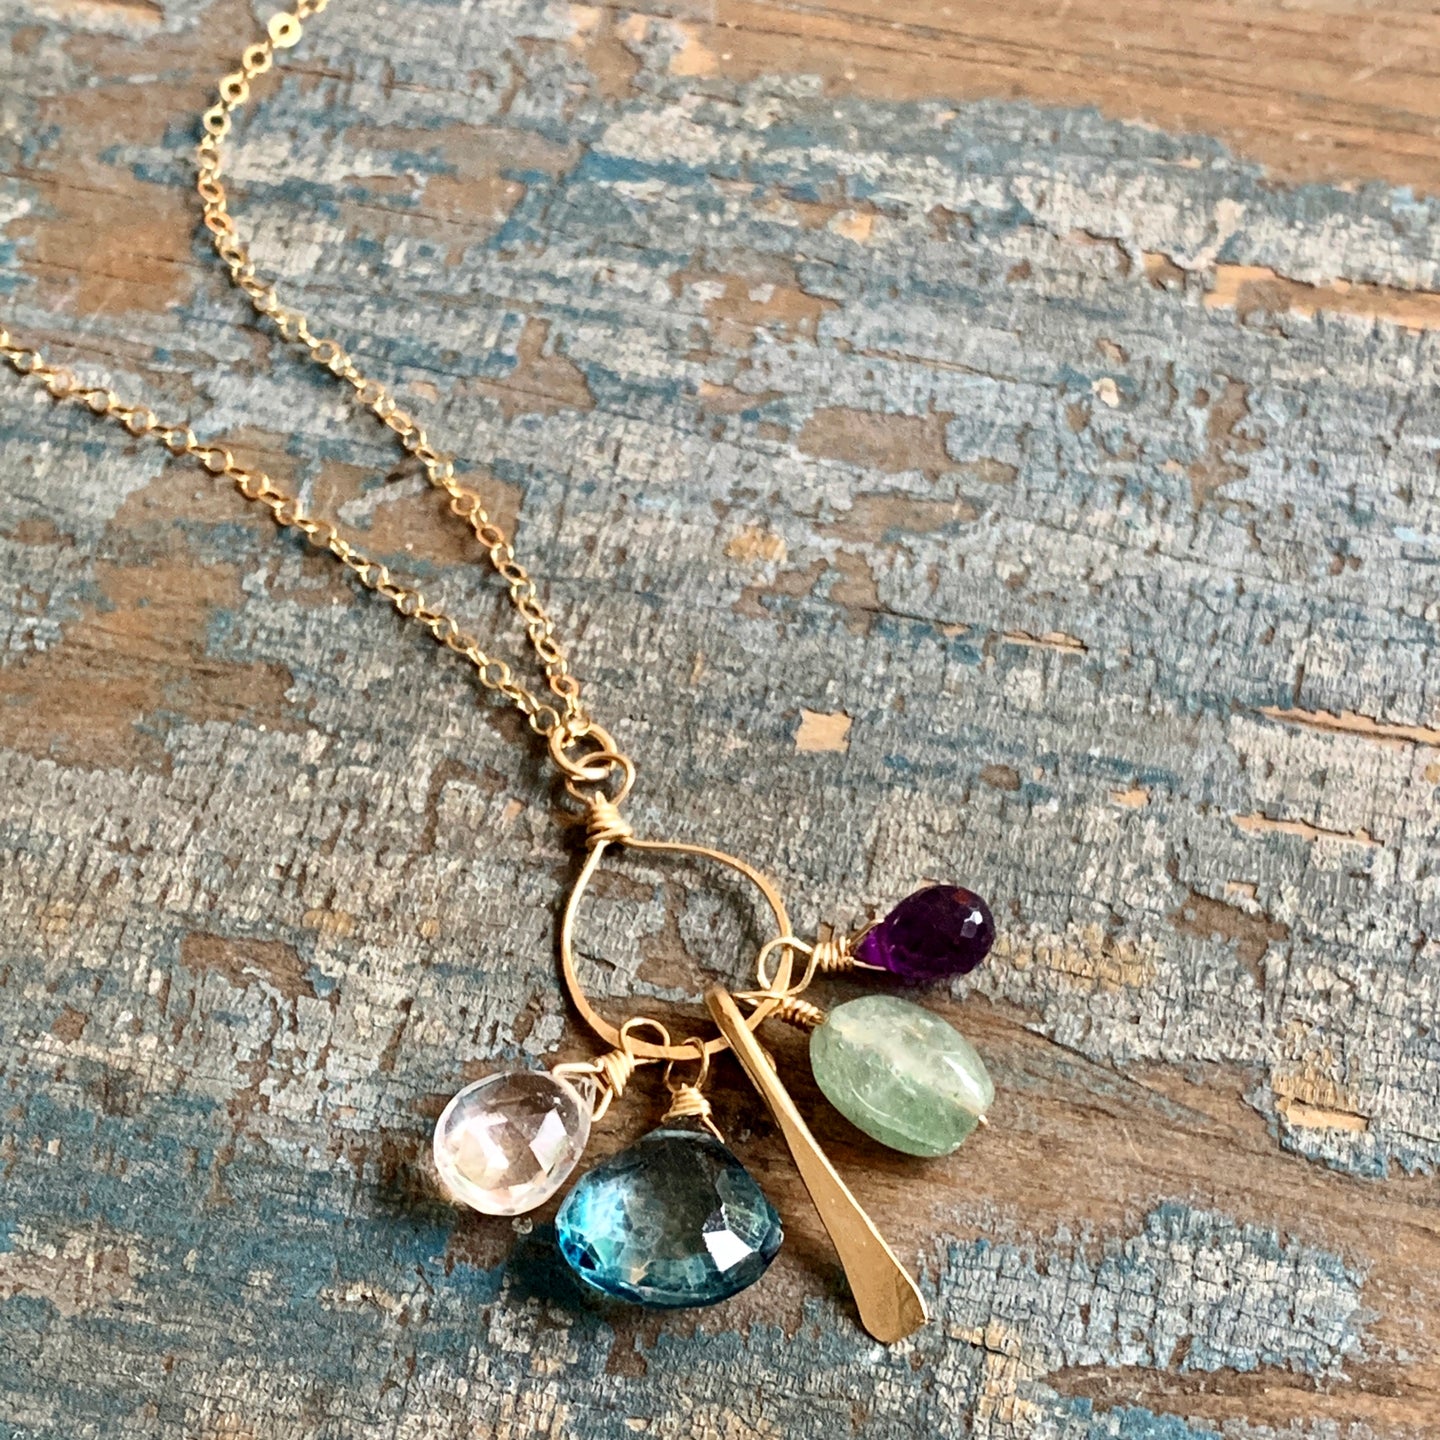 Harmony Necklace/ 14k Gold Filled with a Pendant of Gemstones